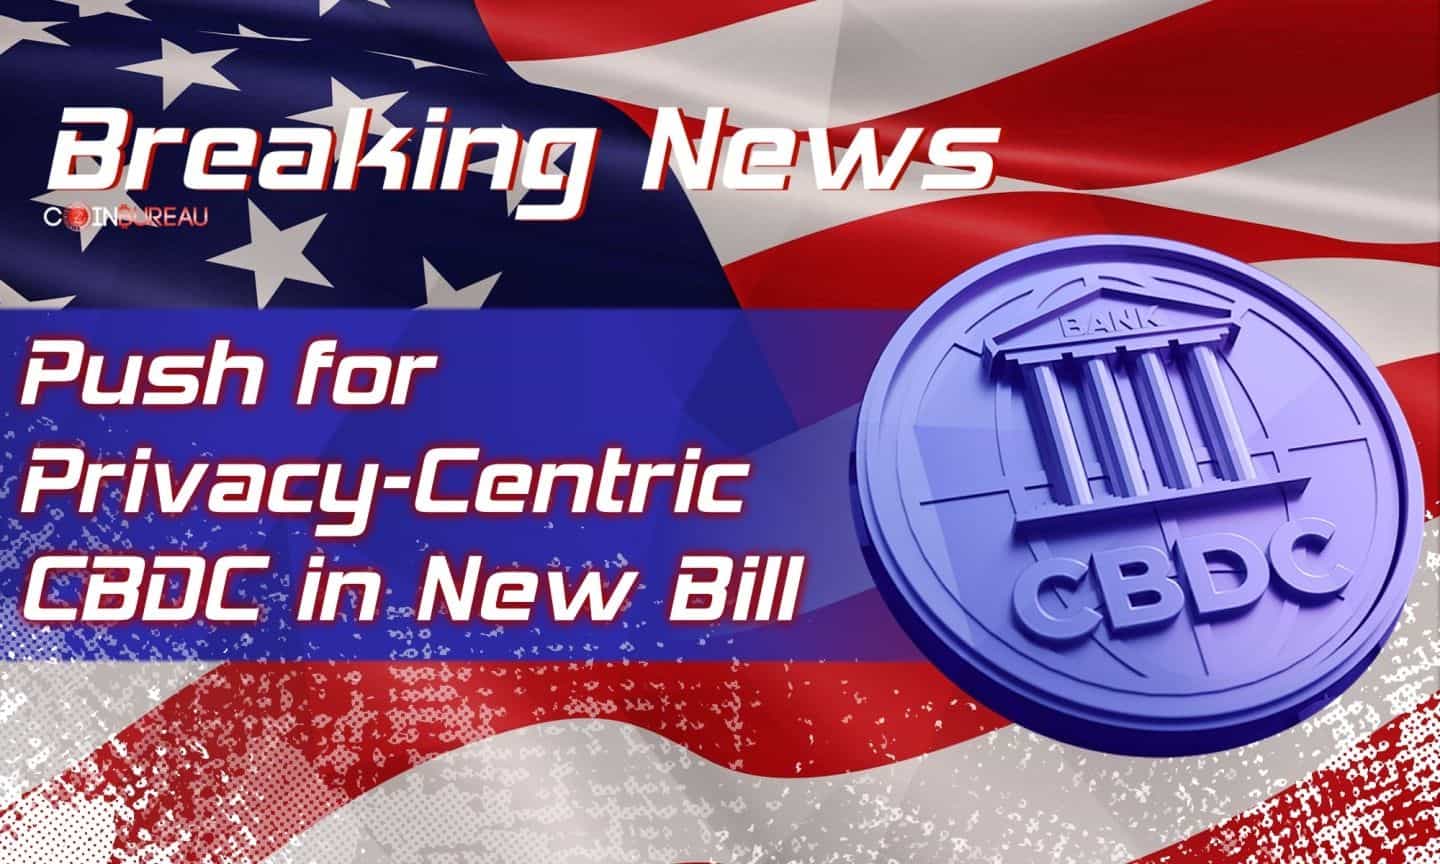 US Officials Push for Privacy-Centric CBDC in New Bill: Report